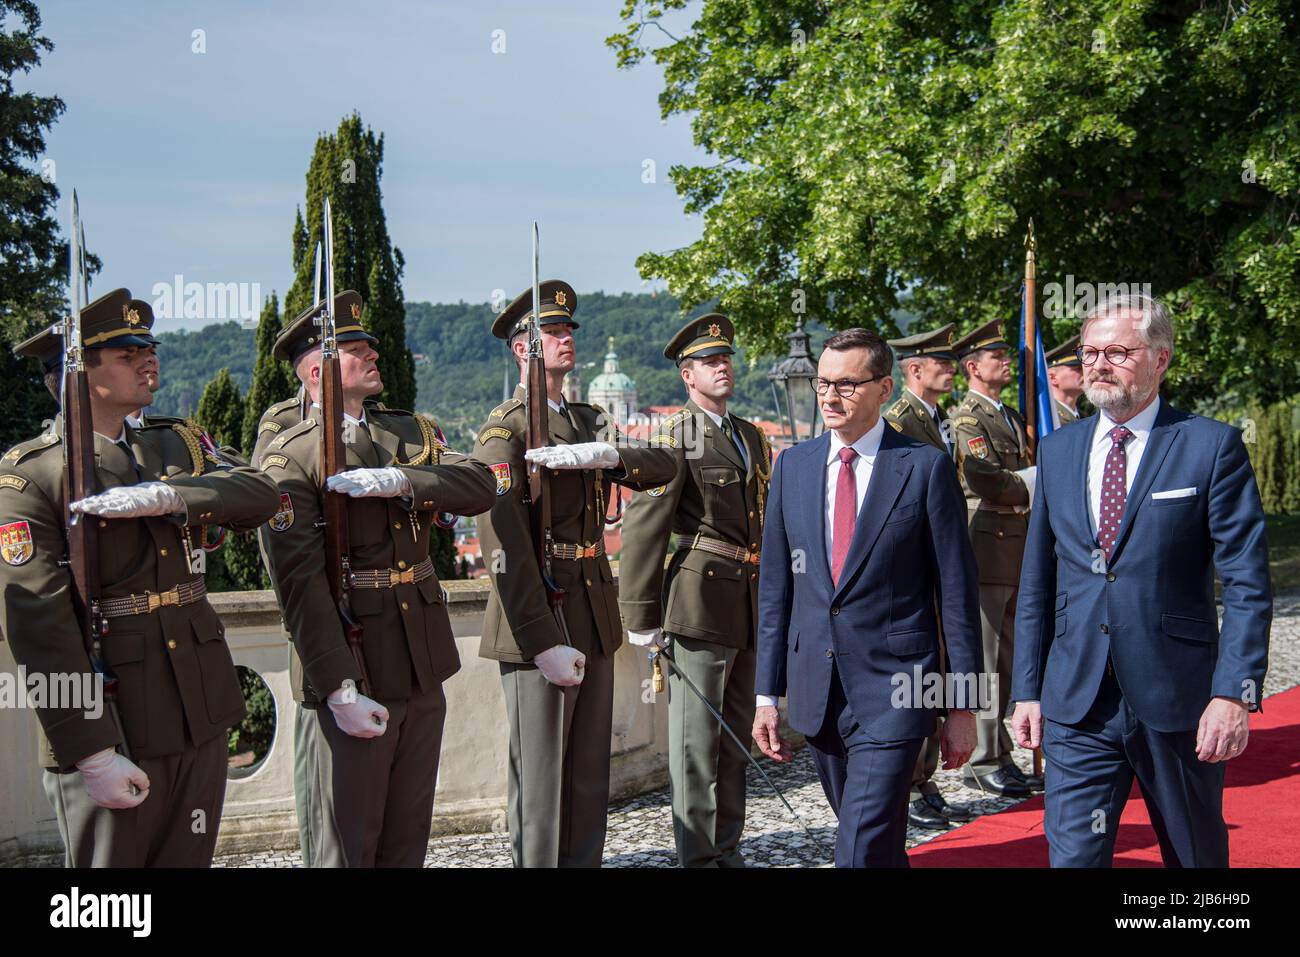 Prague, Czech Republic. 03rd June, 2022. Prime minister of Poland Mateusz Morawiecki (L) and Czech prime minister Petr Fiala (R) are seen walking with Military officers on standby. Joint meeting of Czech and Polish governments take place on the 3rd of June in Prague. Members of both governments discuss the current situation in Ukraine, common energy security, the upcoming Czech presidency of the Council of the European Union, and other topics. (Photo by Tomas Tkacik/SOPA Images/Sipa USA) Credit: Sipa USA/Alamy Live News Stock Photo